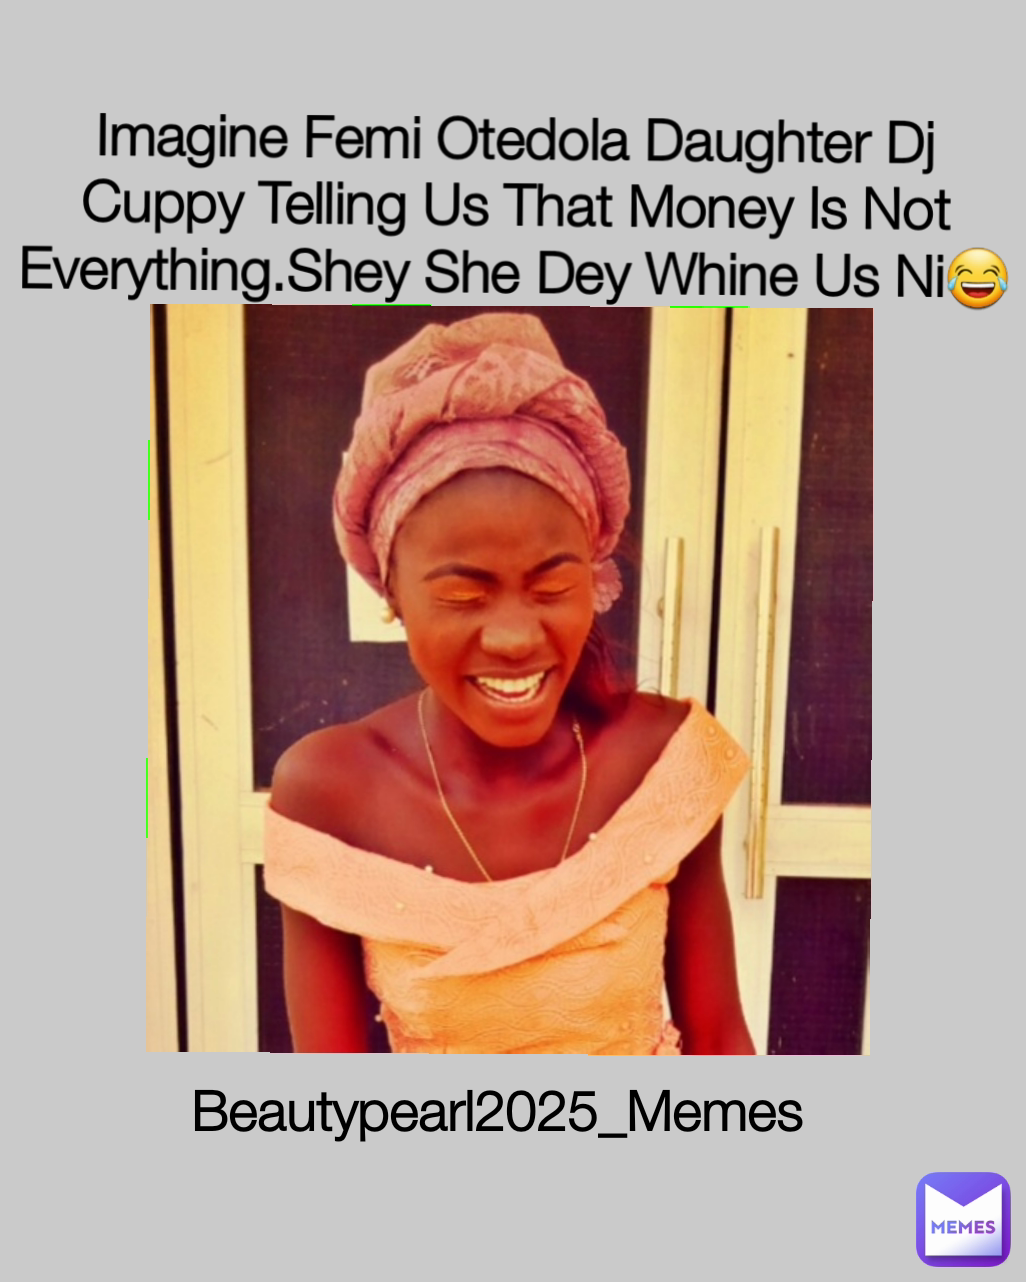 Beautypearl2025_Memes  Imagine Femi Otedola Daughter Dj Cuppy Telling Us That Money Is Not Everything.Shey She Dey Whine Us Ni😂